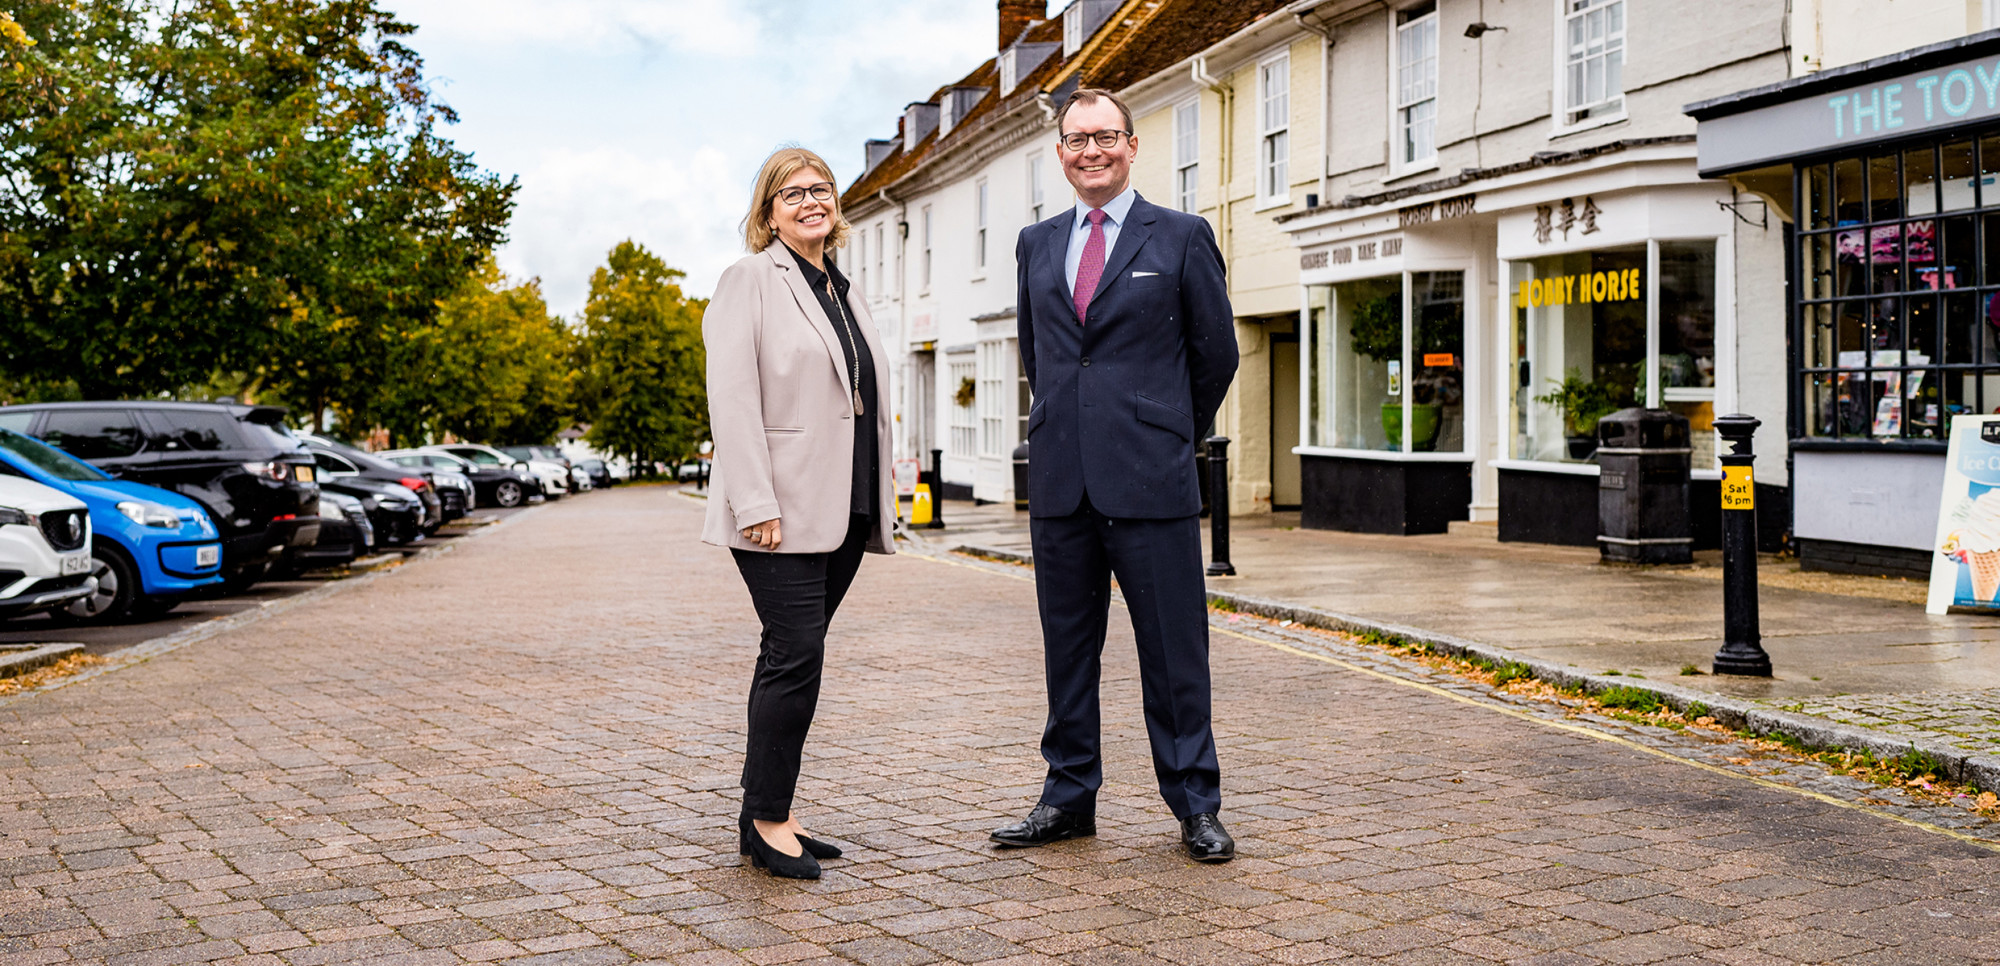 Paul Willans and Nicky Mowat standing in the centre of Alresford, Hampshire